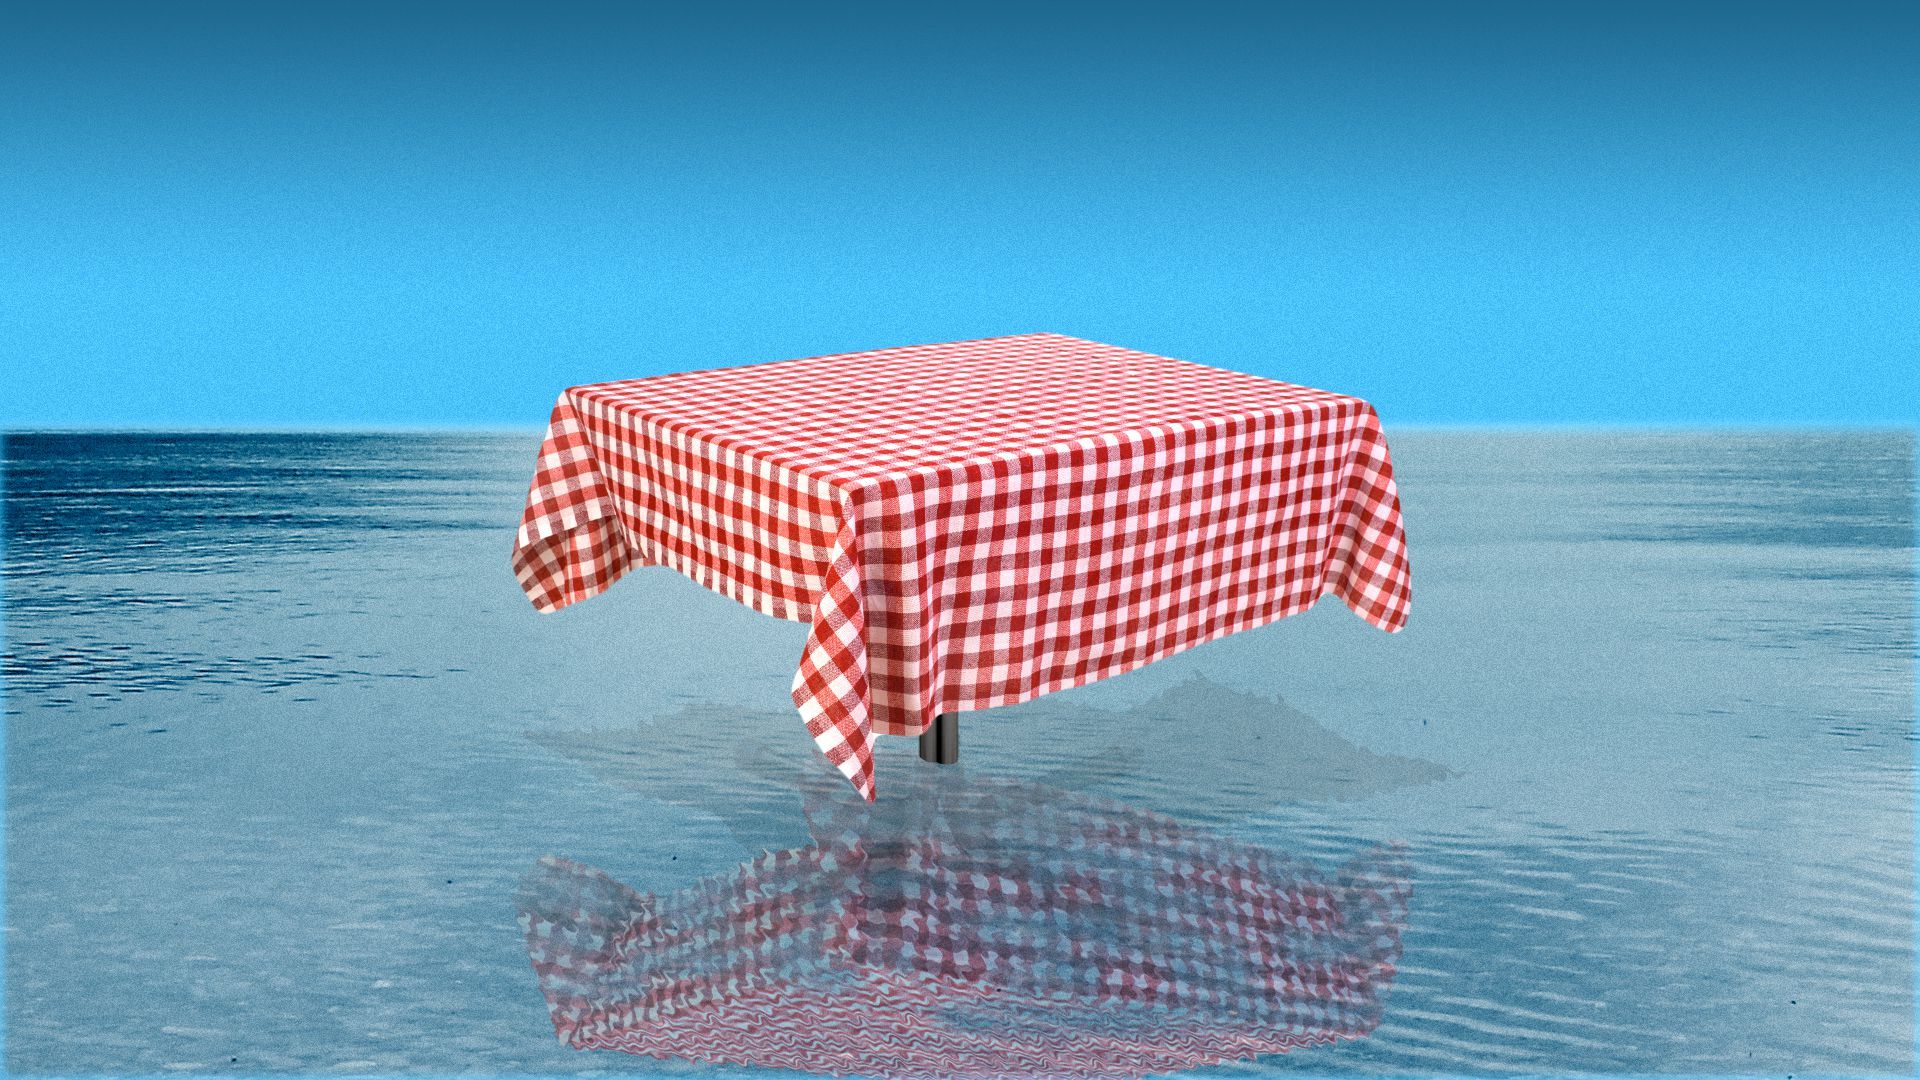 Illustration of a restaurant dining table with checkered tablecloth placed in the middle of a body of water